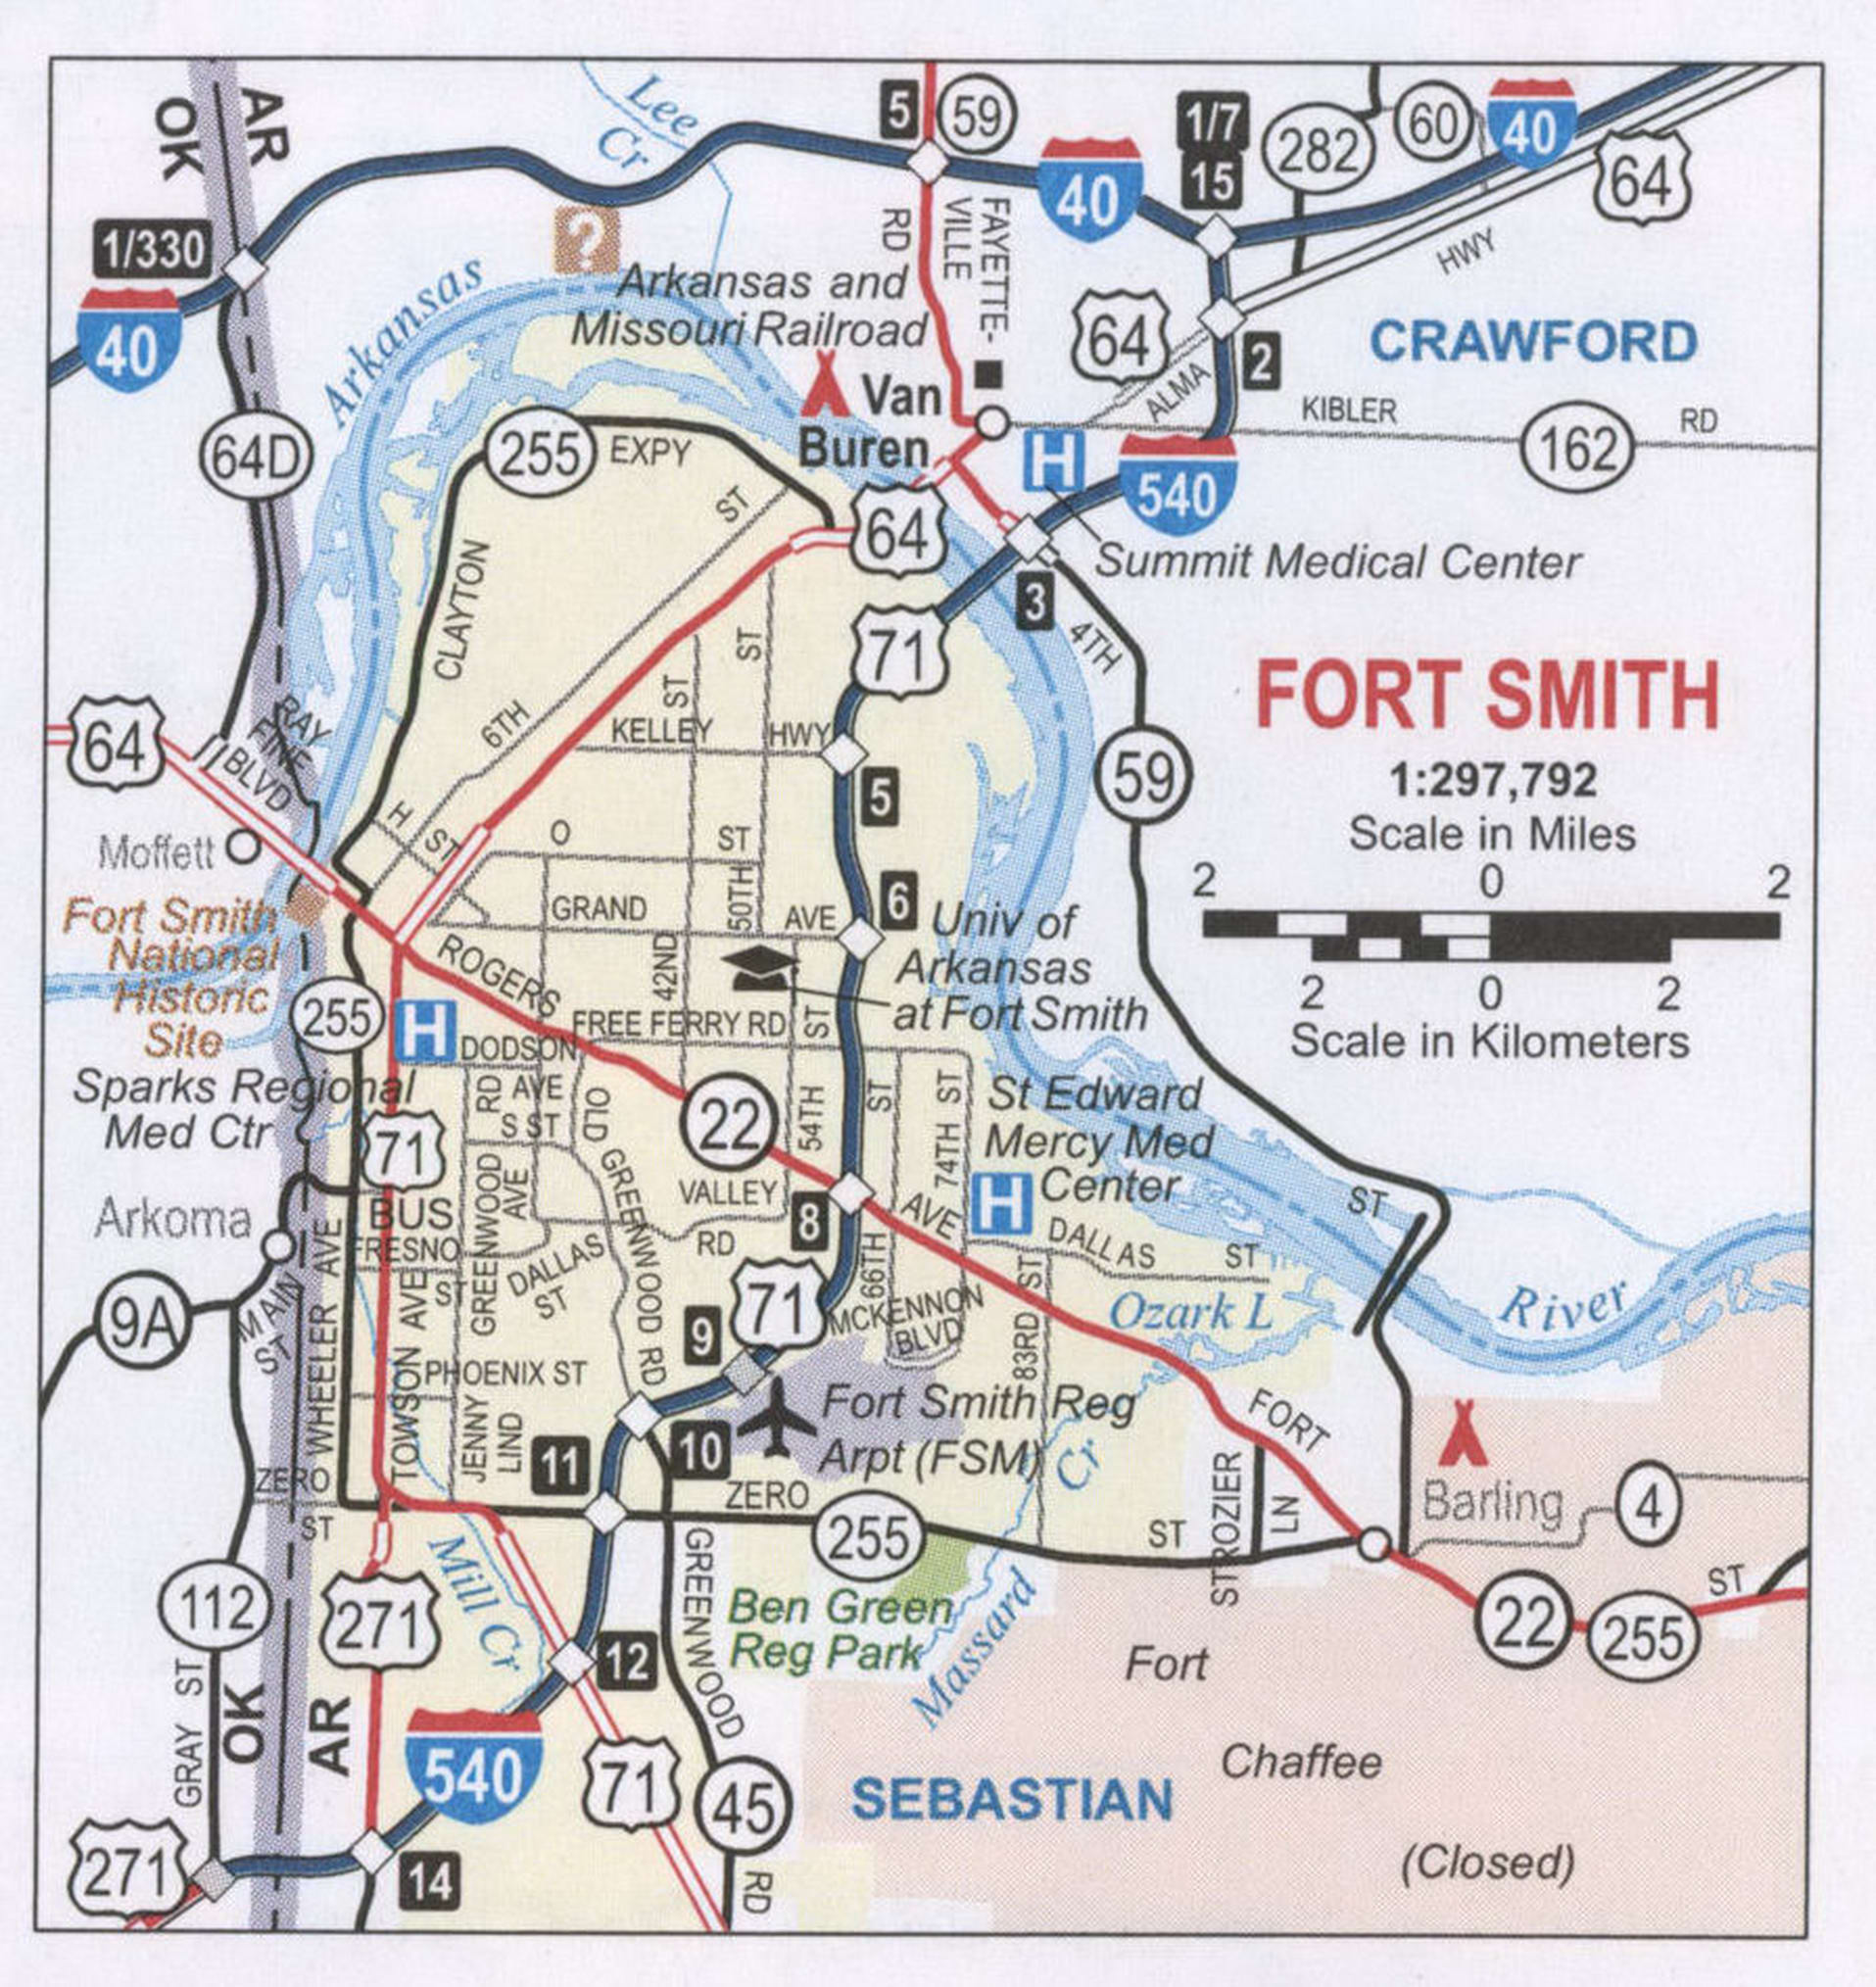 Fort Smith AR road map